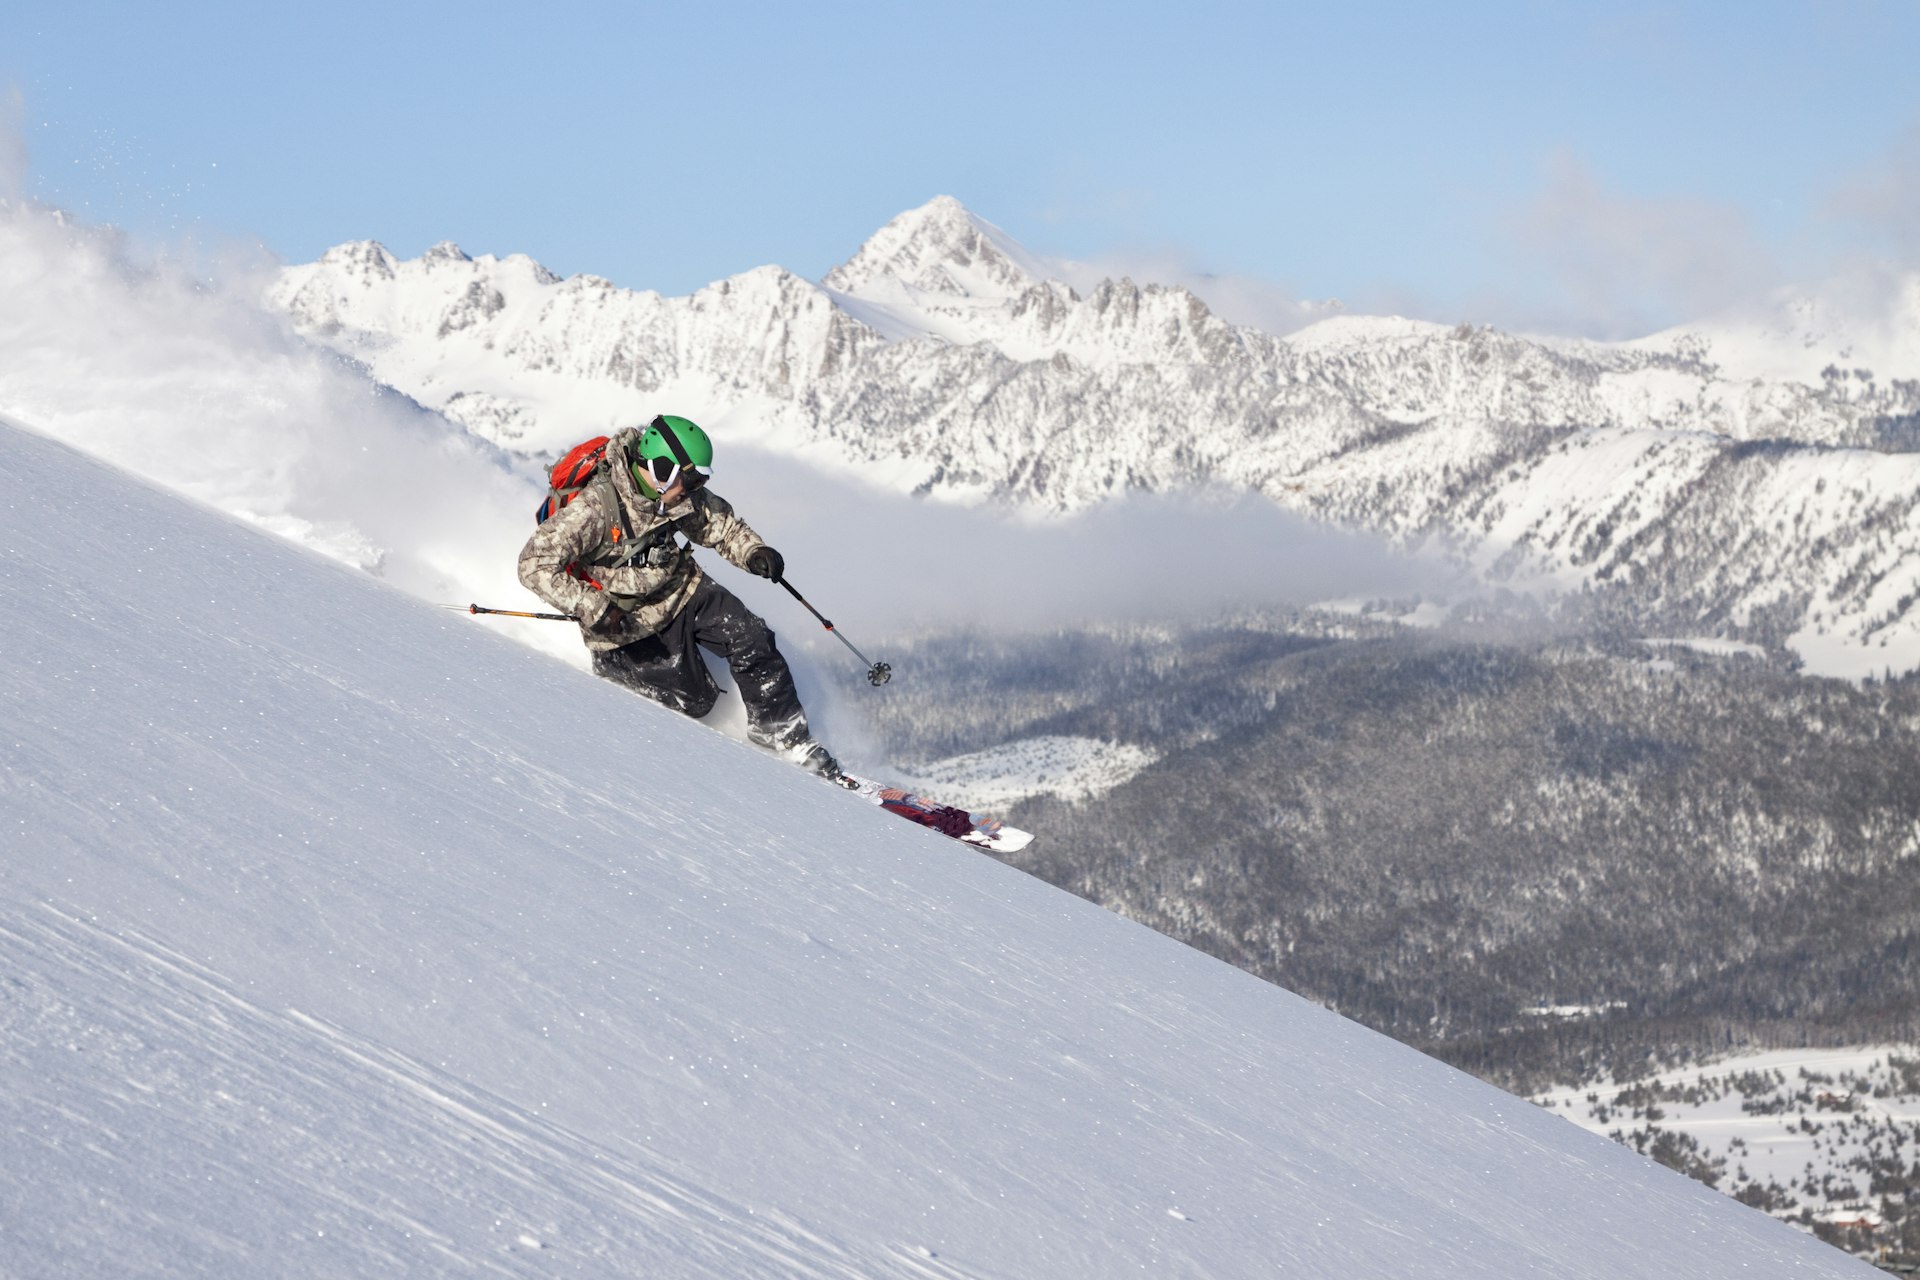 A male skier skiing untracked powder at Big Sky, Montana